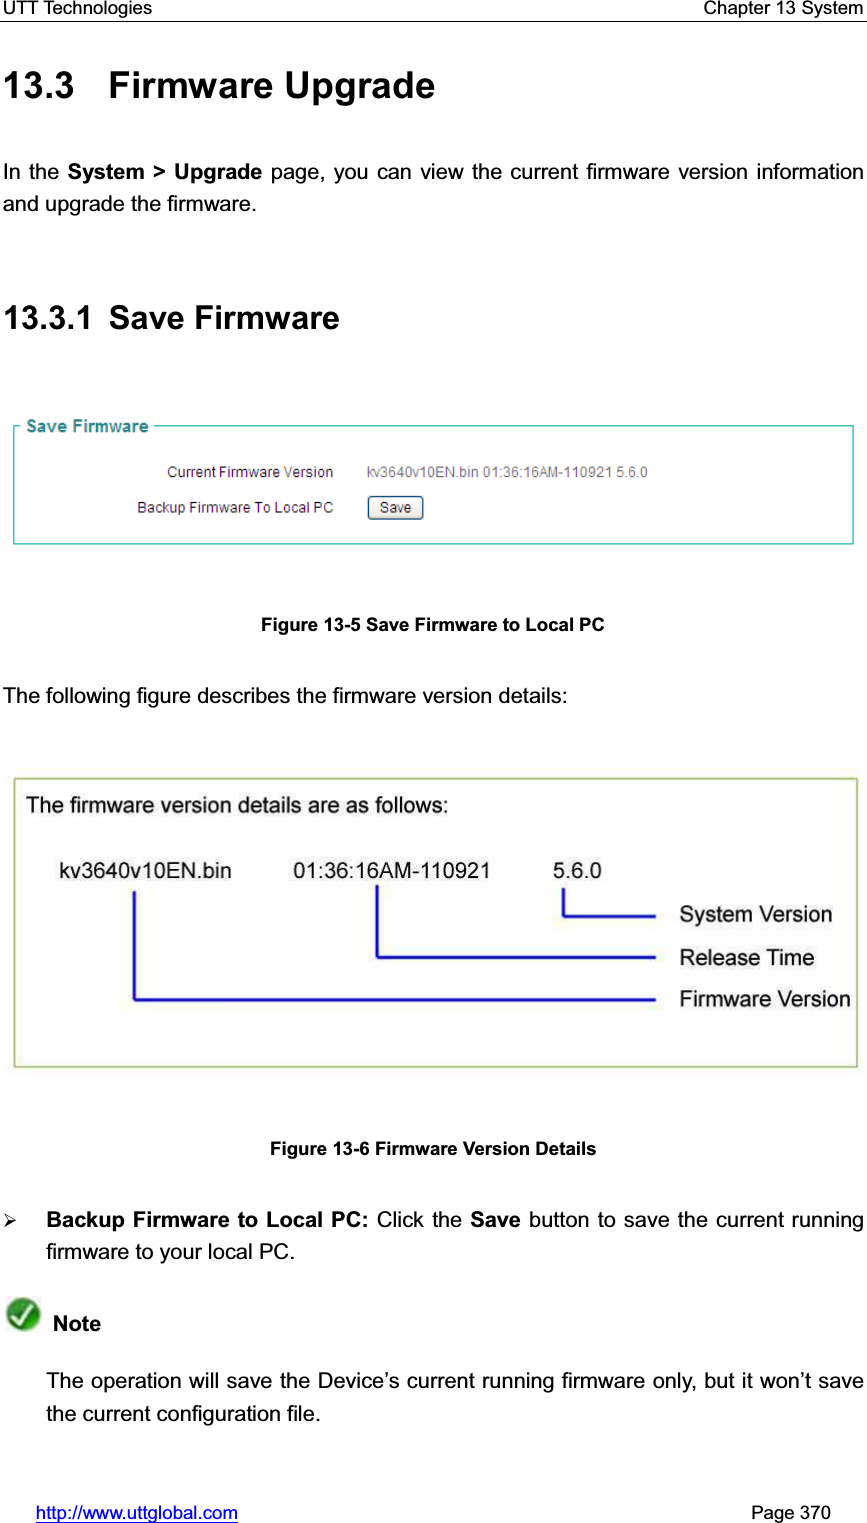 UTT Technologies    Chapter 13 System   http://www.uttglobal.com                                                       Page 370 13.3 Firmware Upgrade In the System &gt; Upgrade page, you can view the current firmware version information and upgrade the firmware.13.3.1 Save Firmware Figure 13-5 Save Firmware to Local PC The following figure describes the firmware version details: Figure 13-6 Firmware Version Details ¾Backup Firmware to Local PC: Click the Save button to save the current running firmware to your local PC.   NoteThe operation will save the Device¶s current running firmware only, but it won¶t save the current configuration file. 